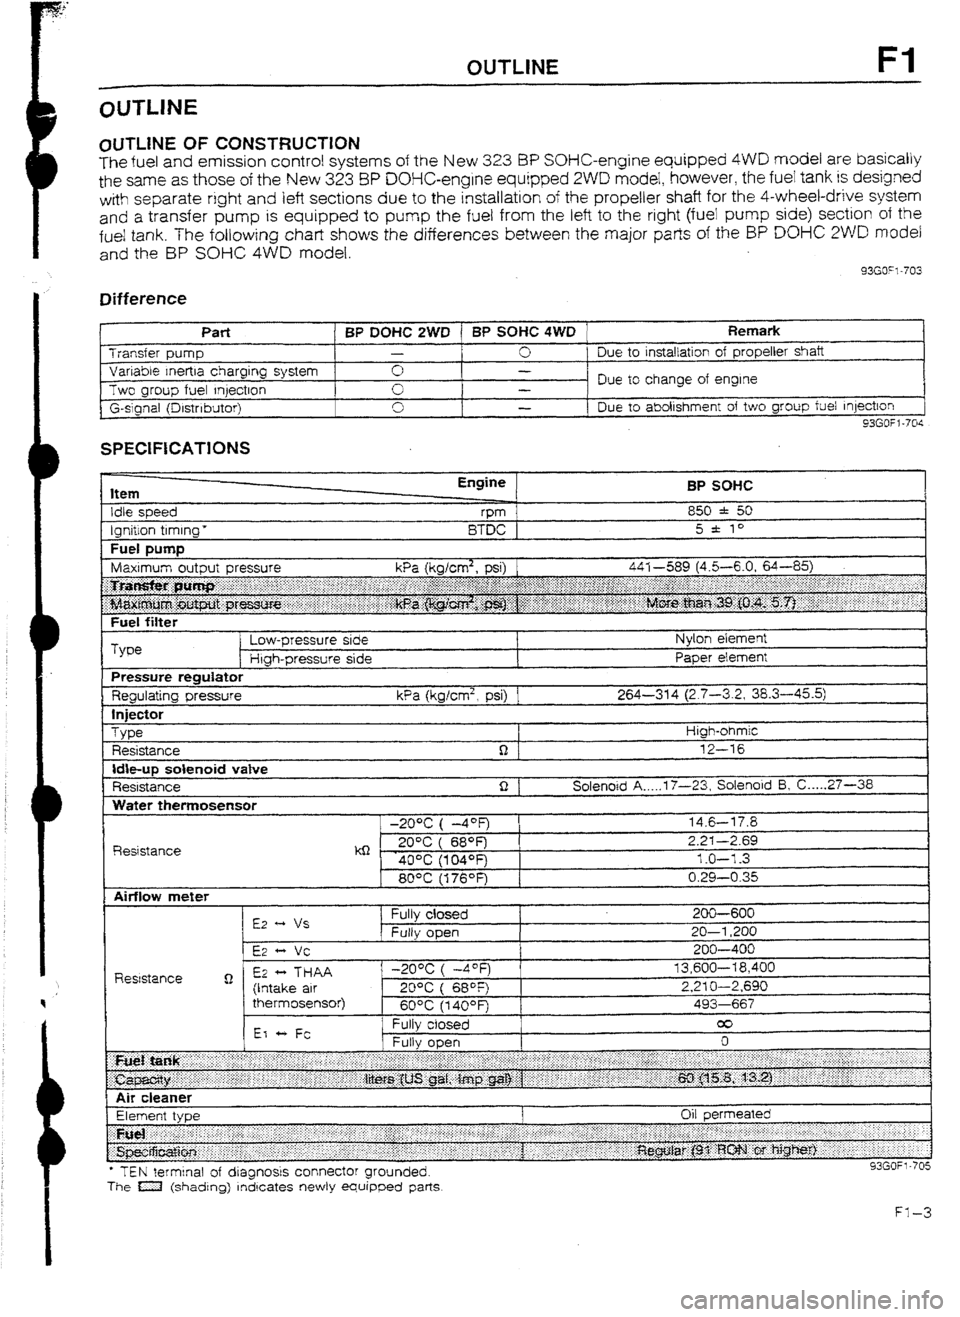 MAZDA 232 1990  Workshop Manual Suplement OUTLINE Fl 
OlJTLlNE OF CONSTRUCTION 
The fuel and emission control systems of the New 3.23 BP SOHC-engine equipped 4WD model are basically 
the same as those of the New 323 8P DOHC-engine equipped 2W